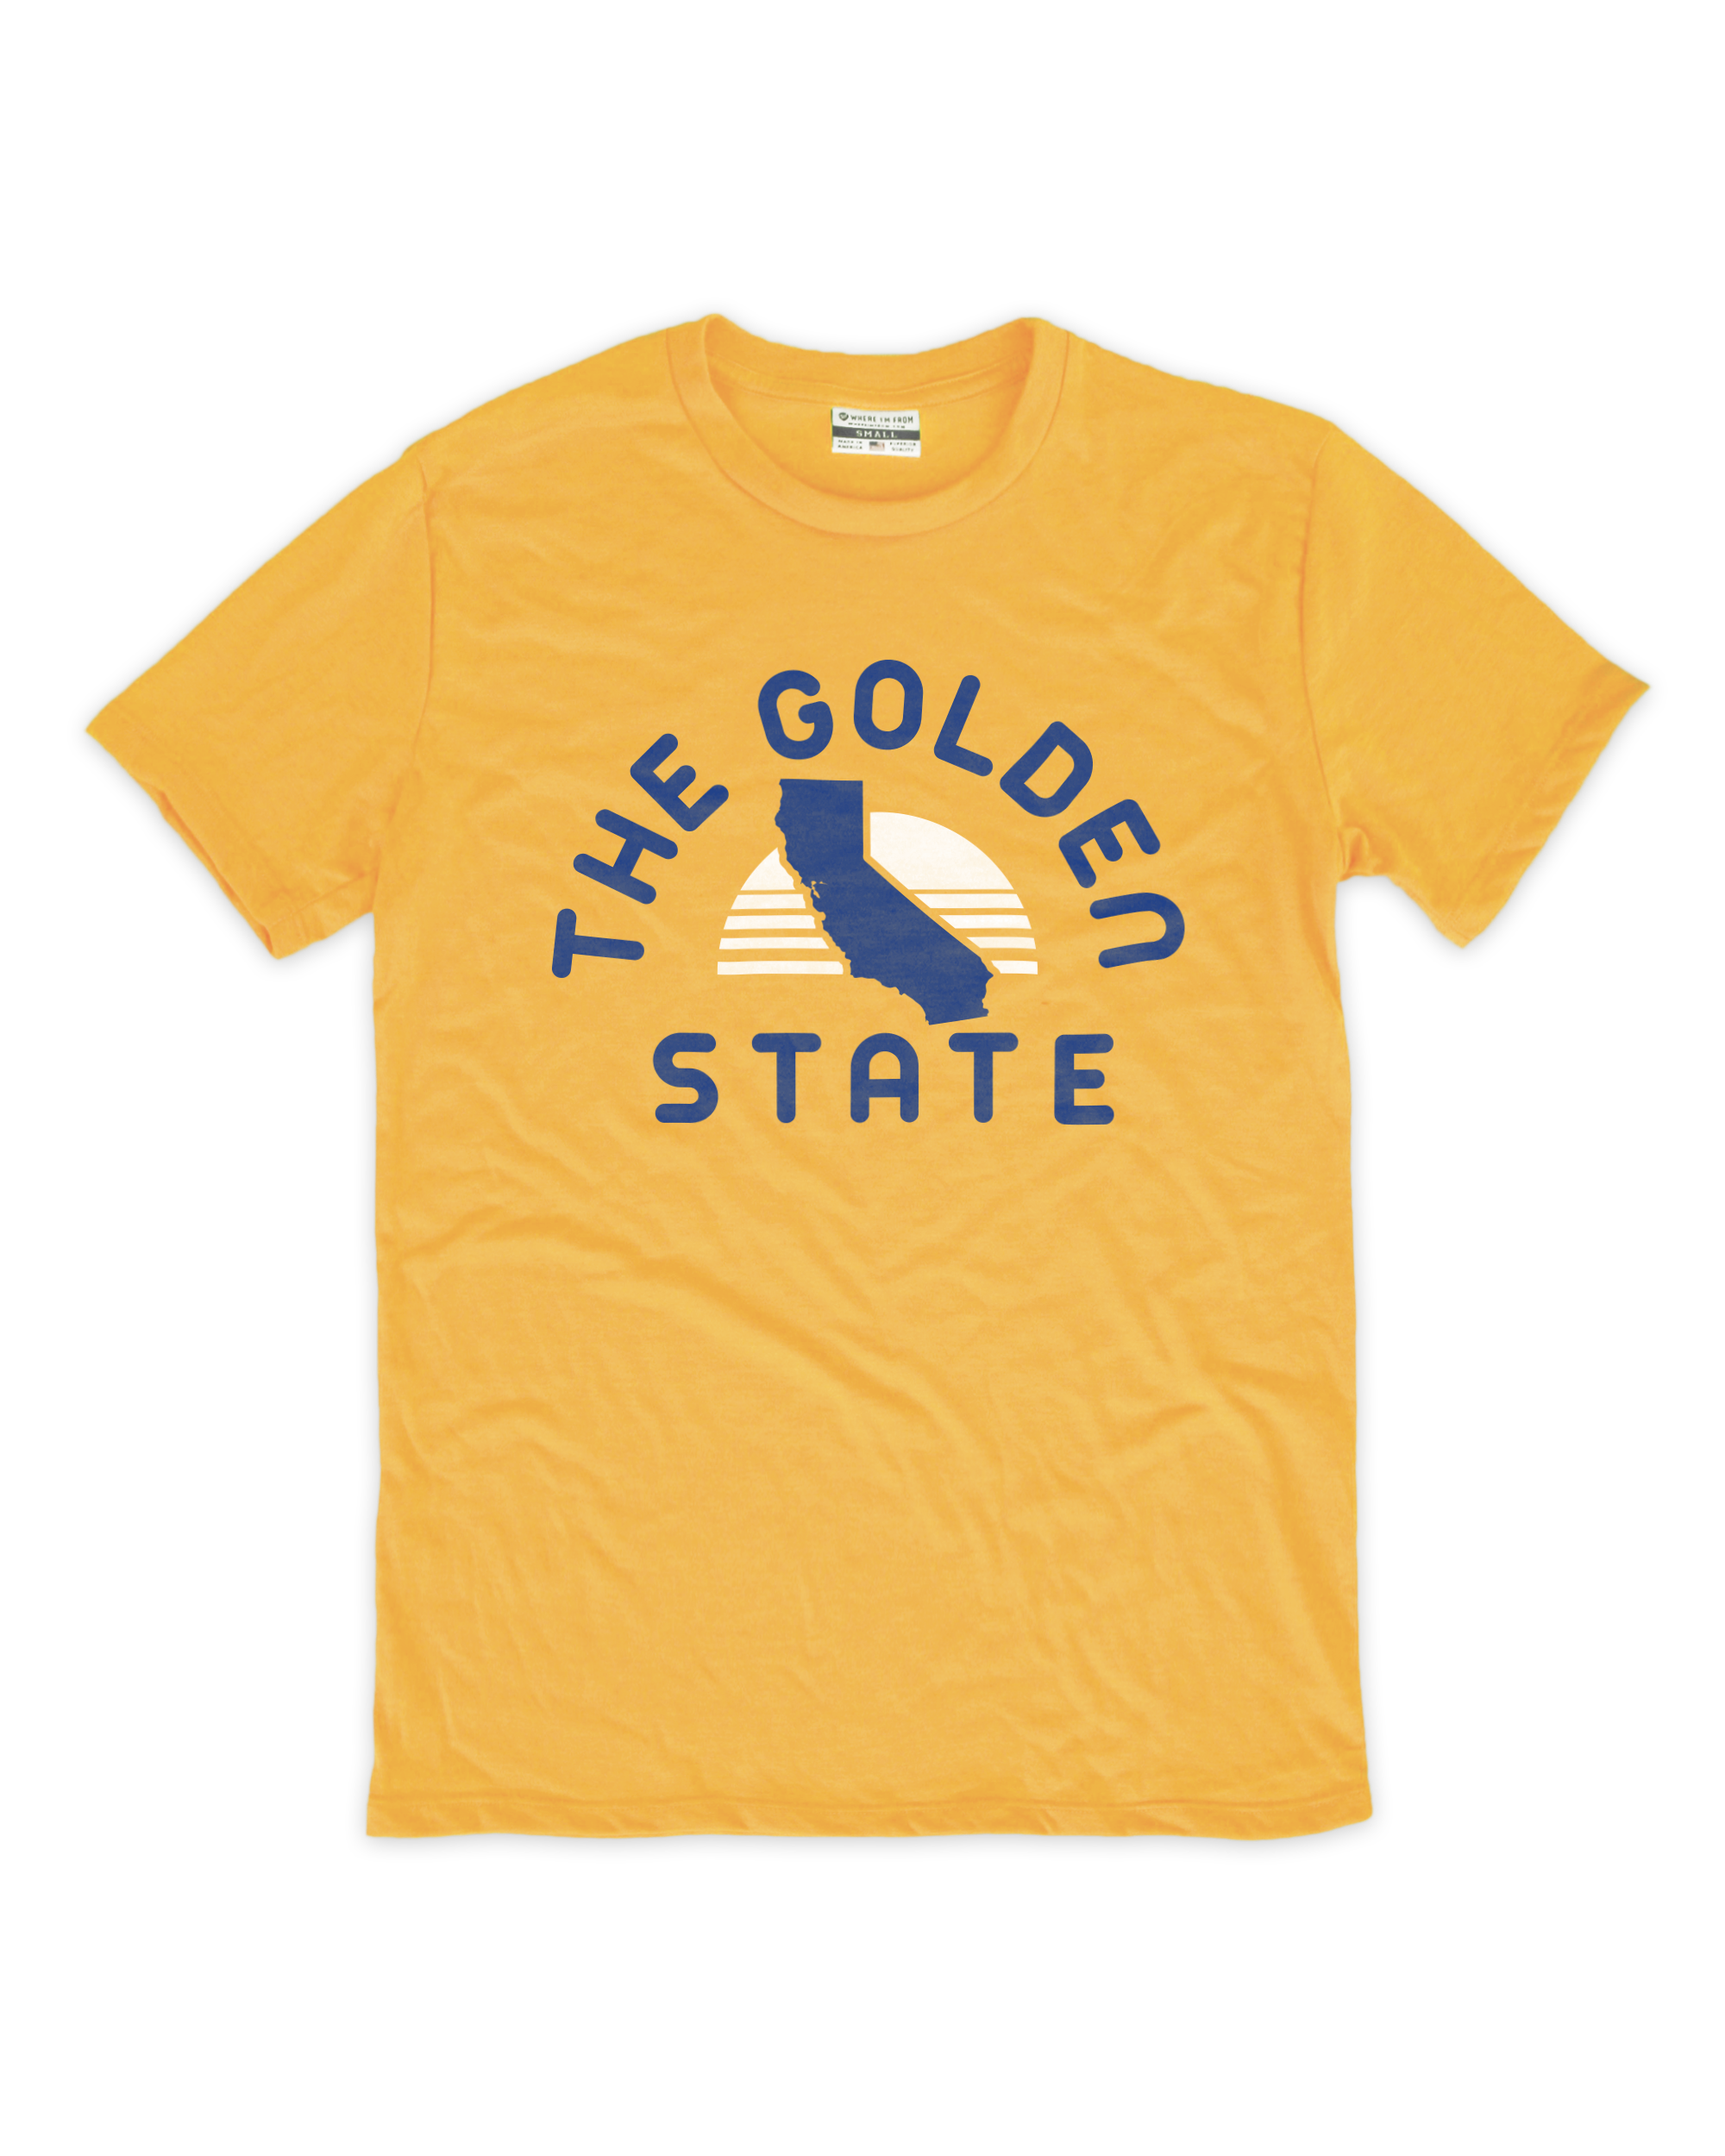 The Golden State Stripes Crew